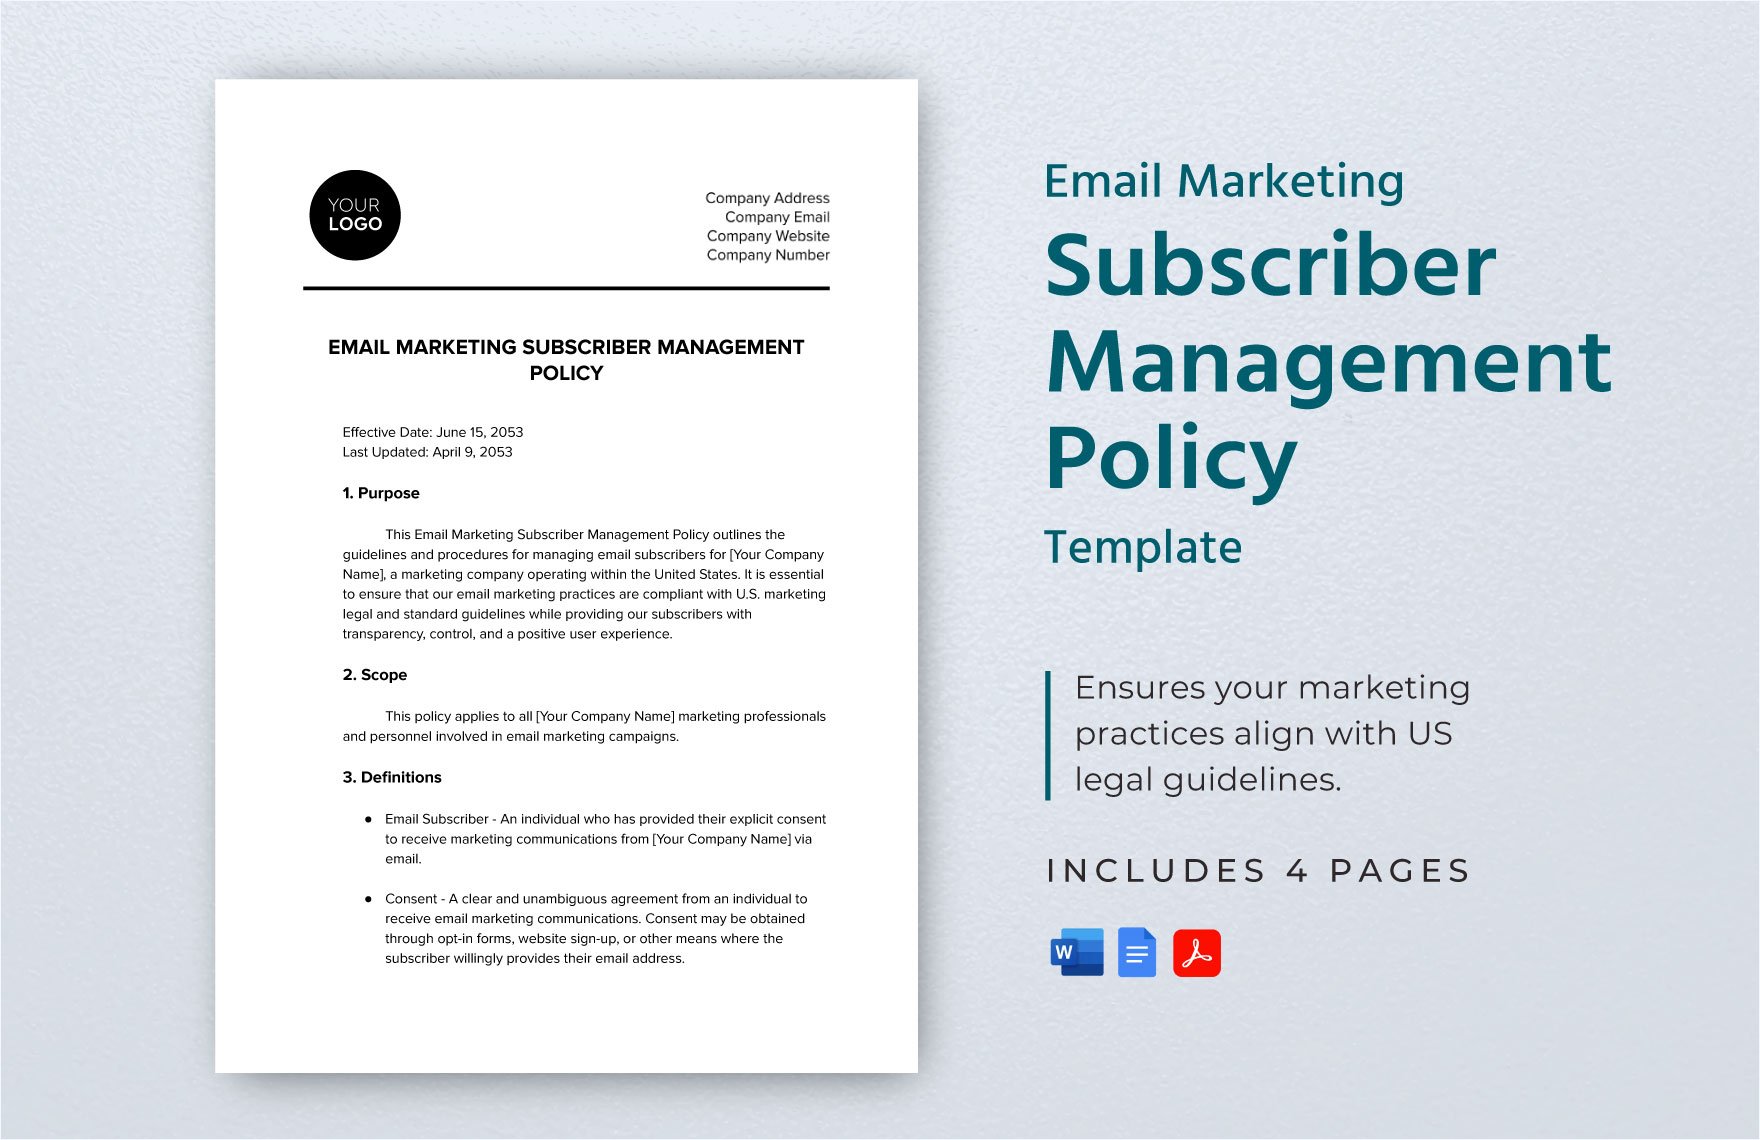 Email Marketing Subscriber Management Policy Template